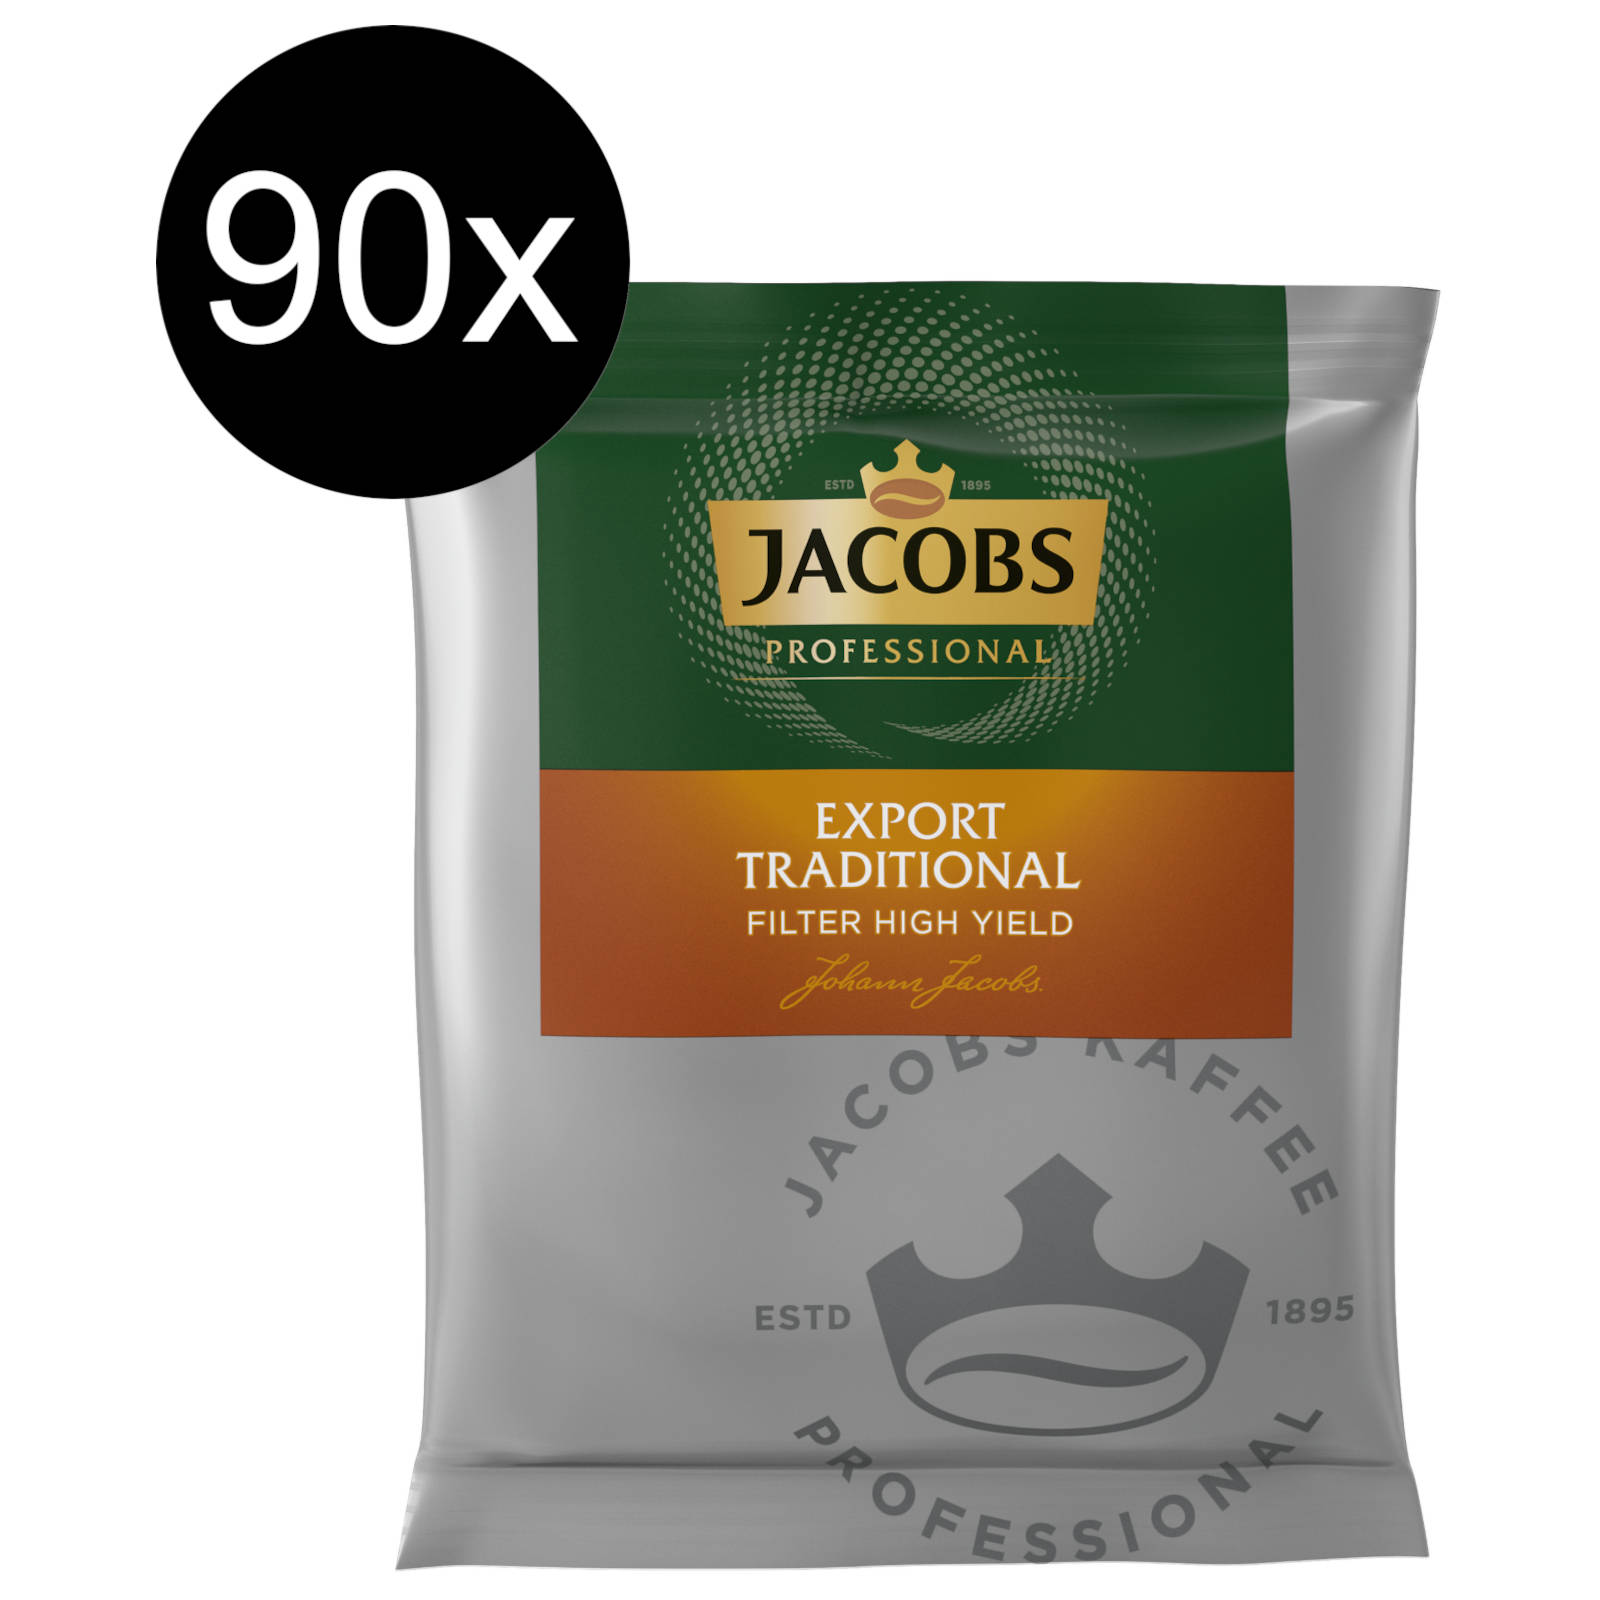 JACOBS JACOBS Professional Traditional HY Press) Export French Filterkaffee (Filter